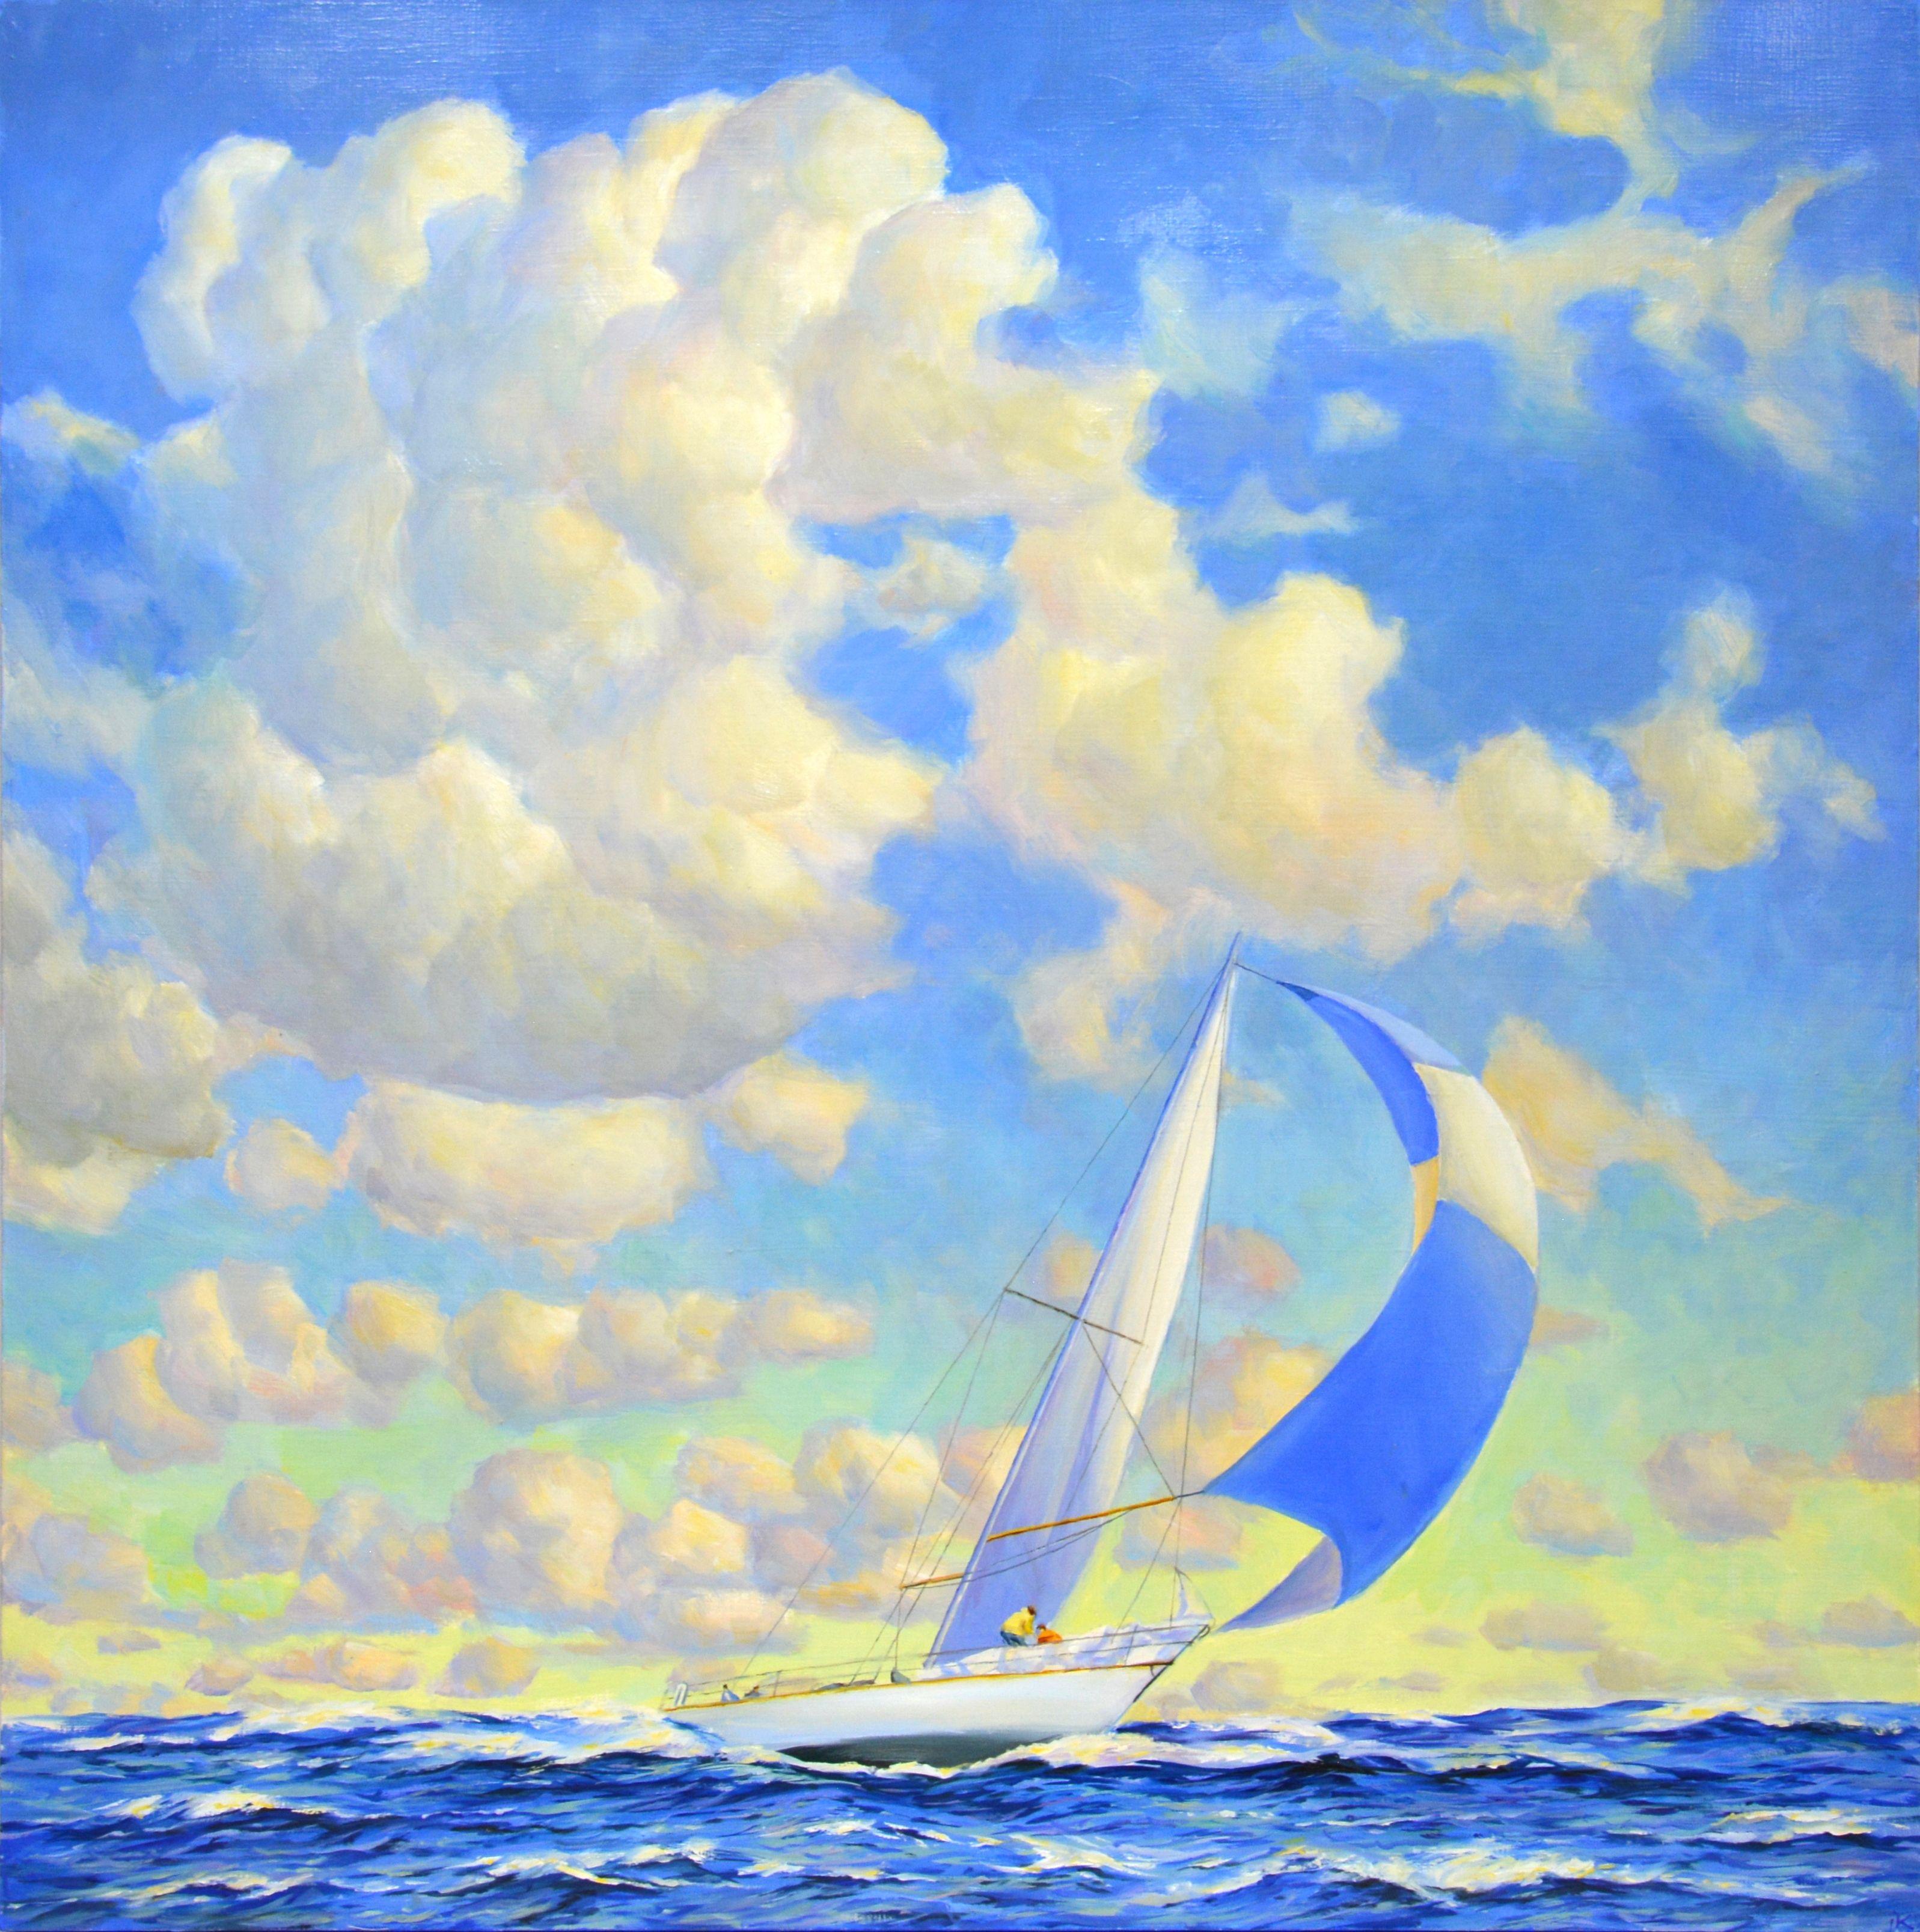 Wall mural Fresh wind. Seascape with a yacht. The sailboat cruises on the waves of the ocean, floating clouds, a serene view. Quality materials are used. Oil painting on linen canvas. Varnished. Artist's signature. Ready to hang. Certificate of